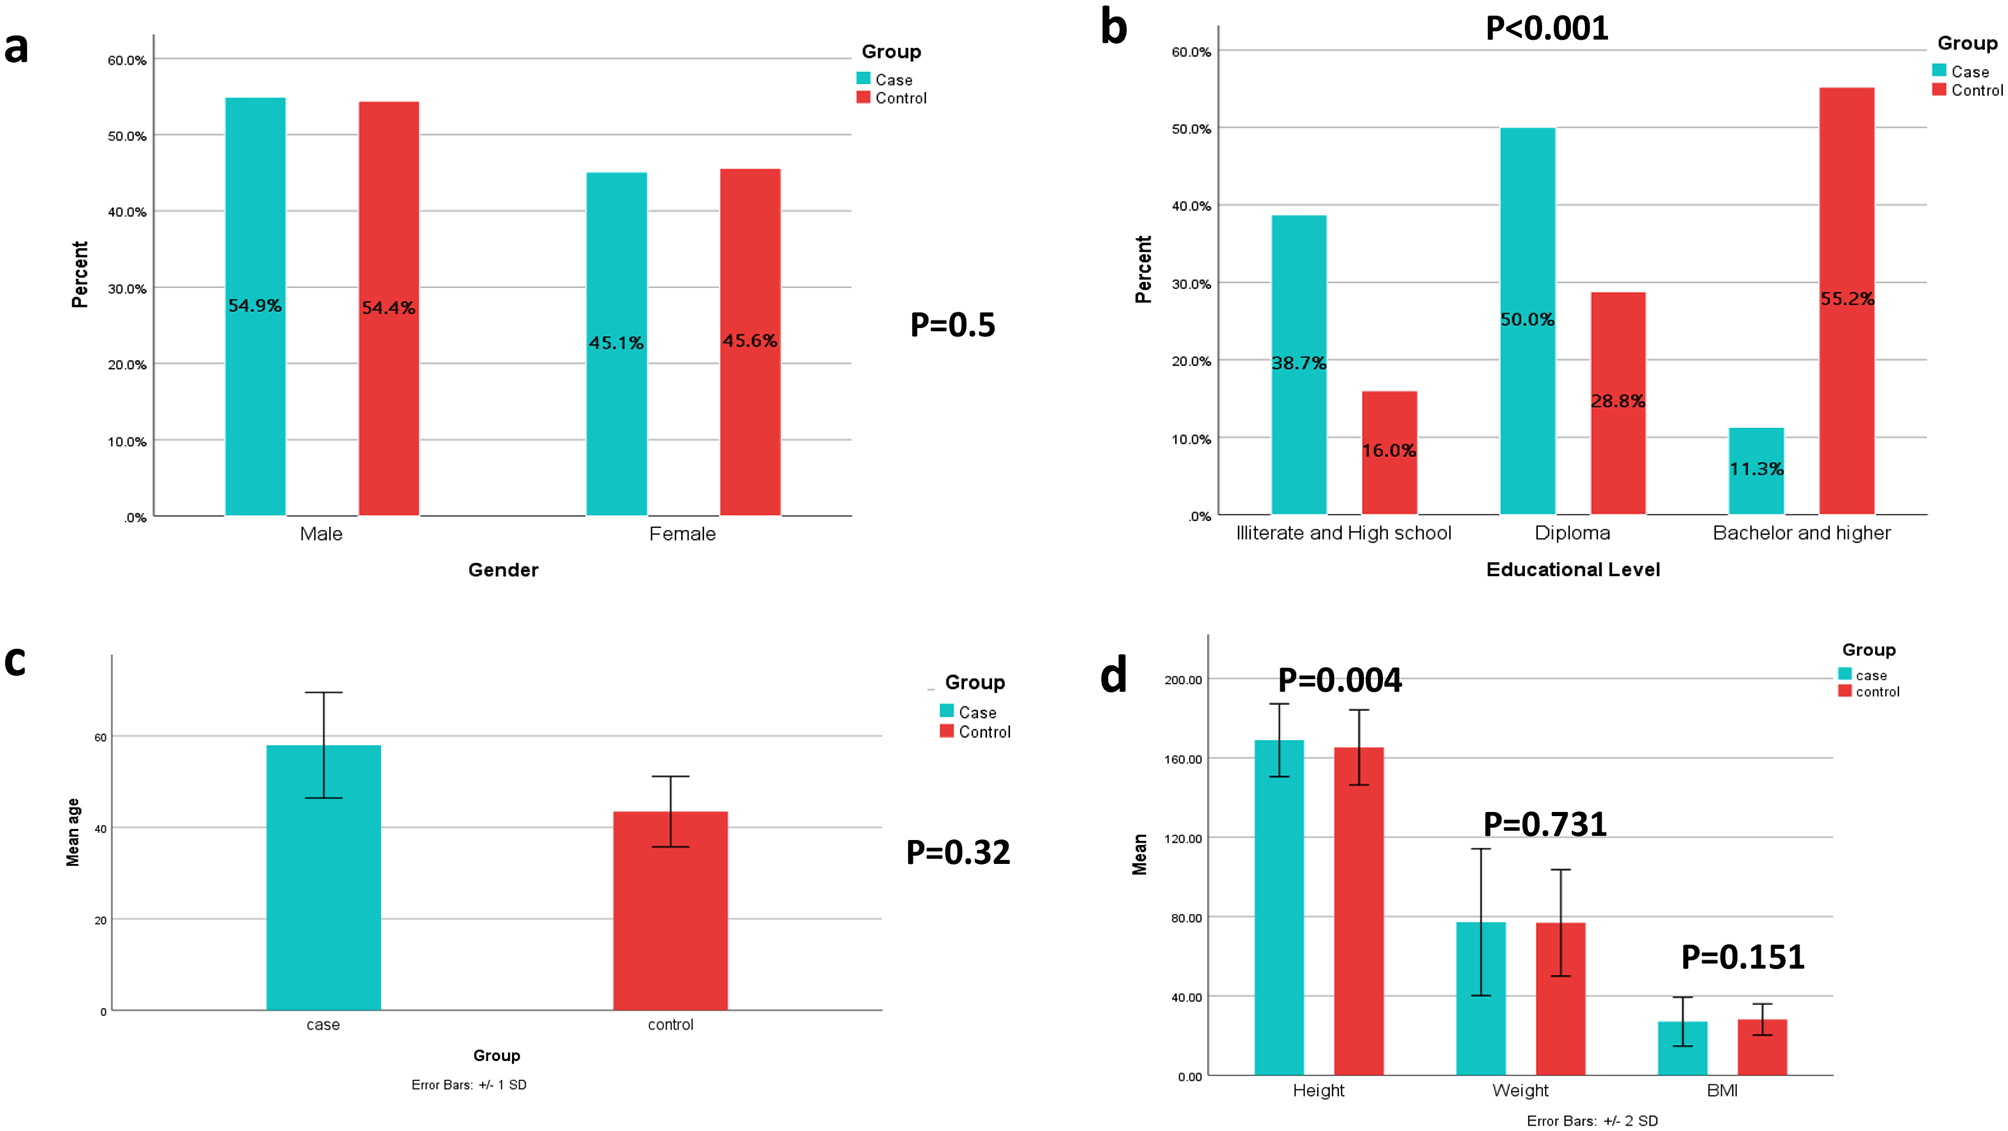 Adherence to the nordic diet is associated with anxiety, stress, and depression in recovered COVID-19 patients, a case-control study